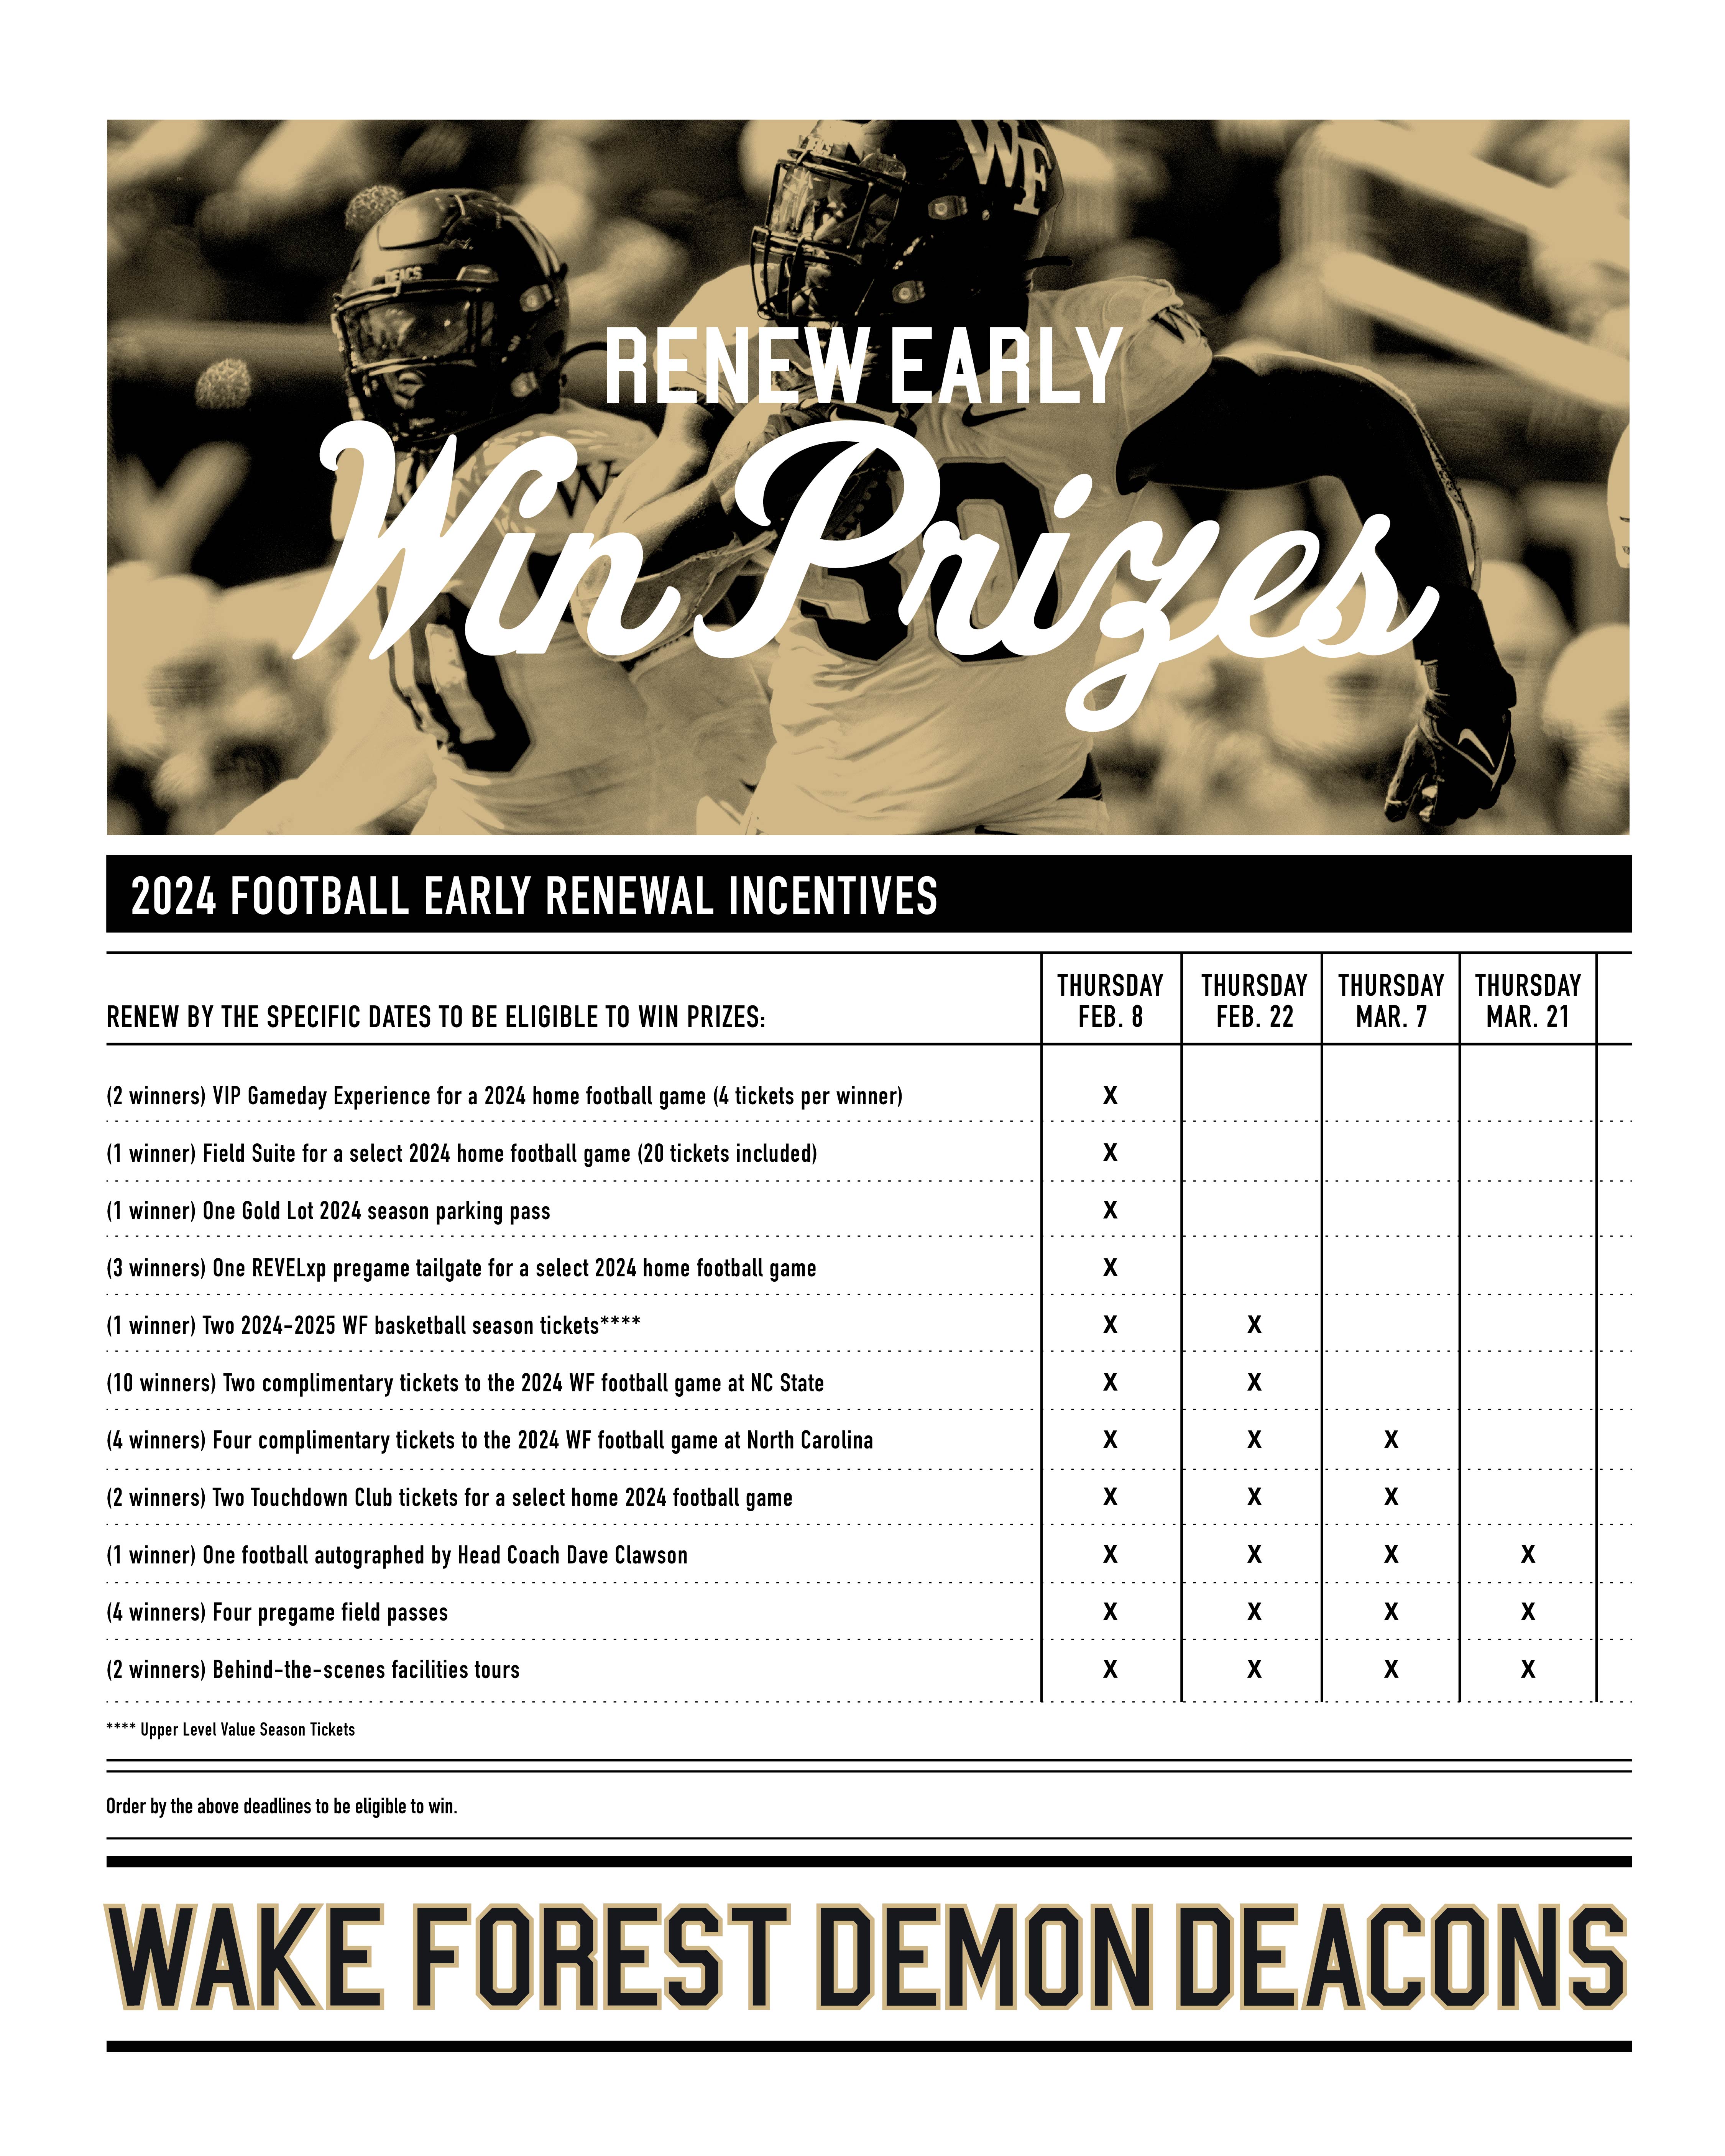 Renew Early, Win Prizes - 2024 Football Early Renewal Incentives